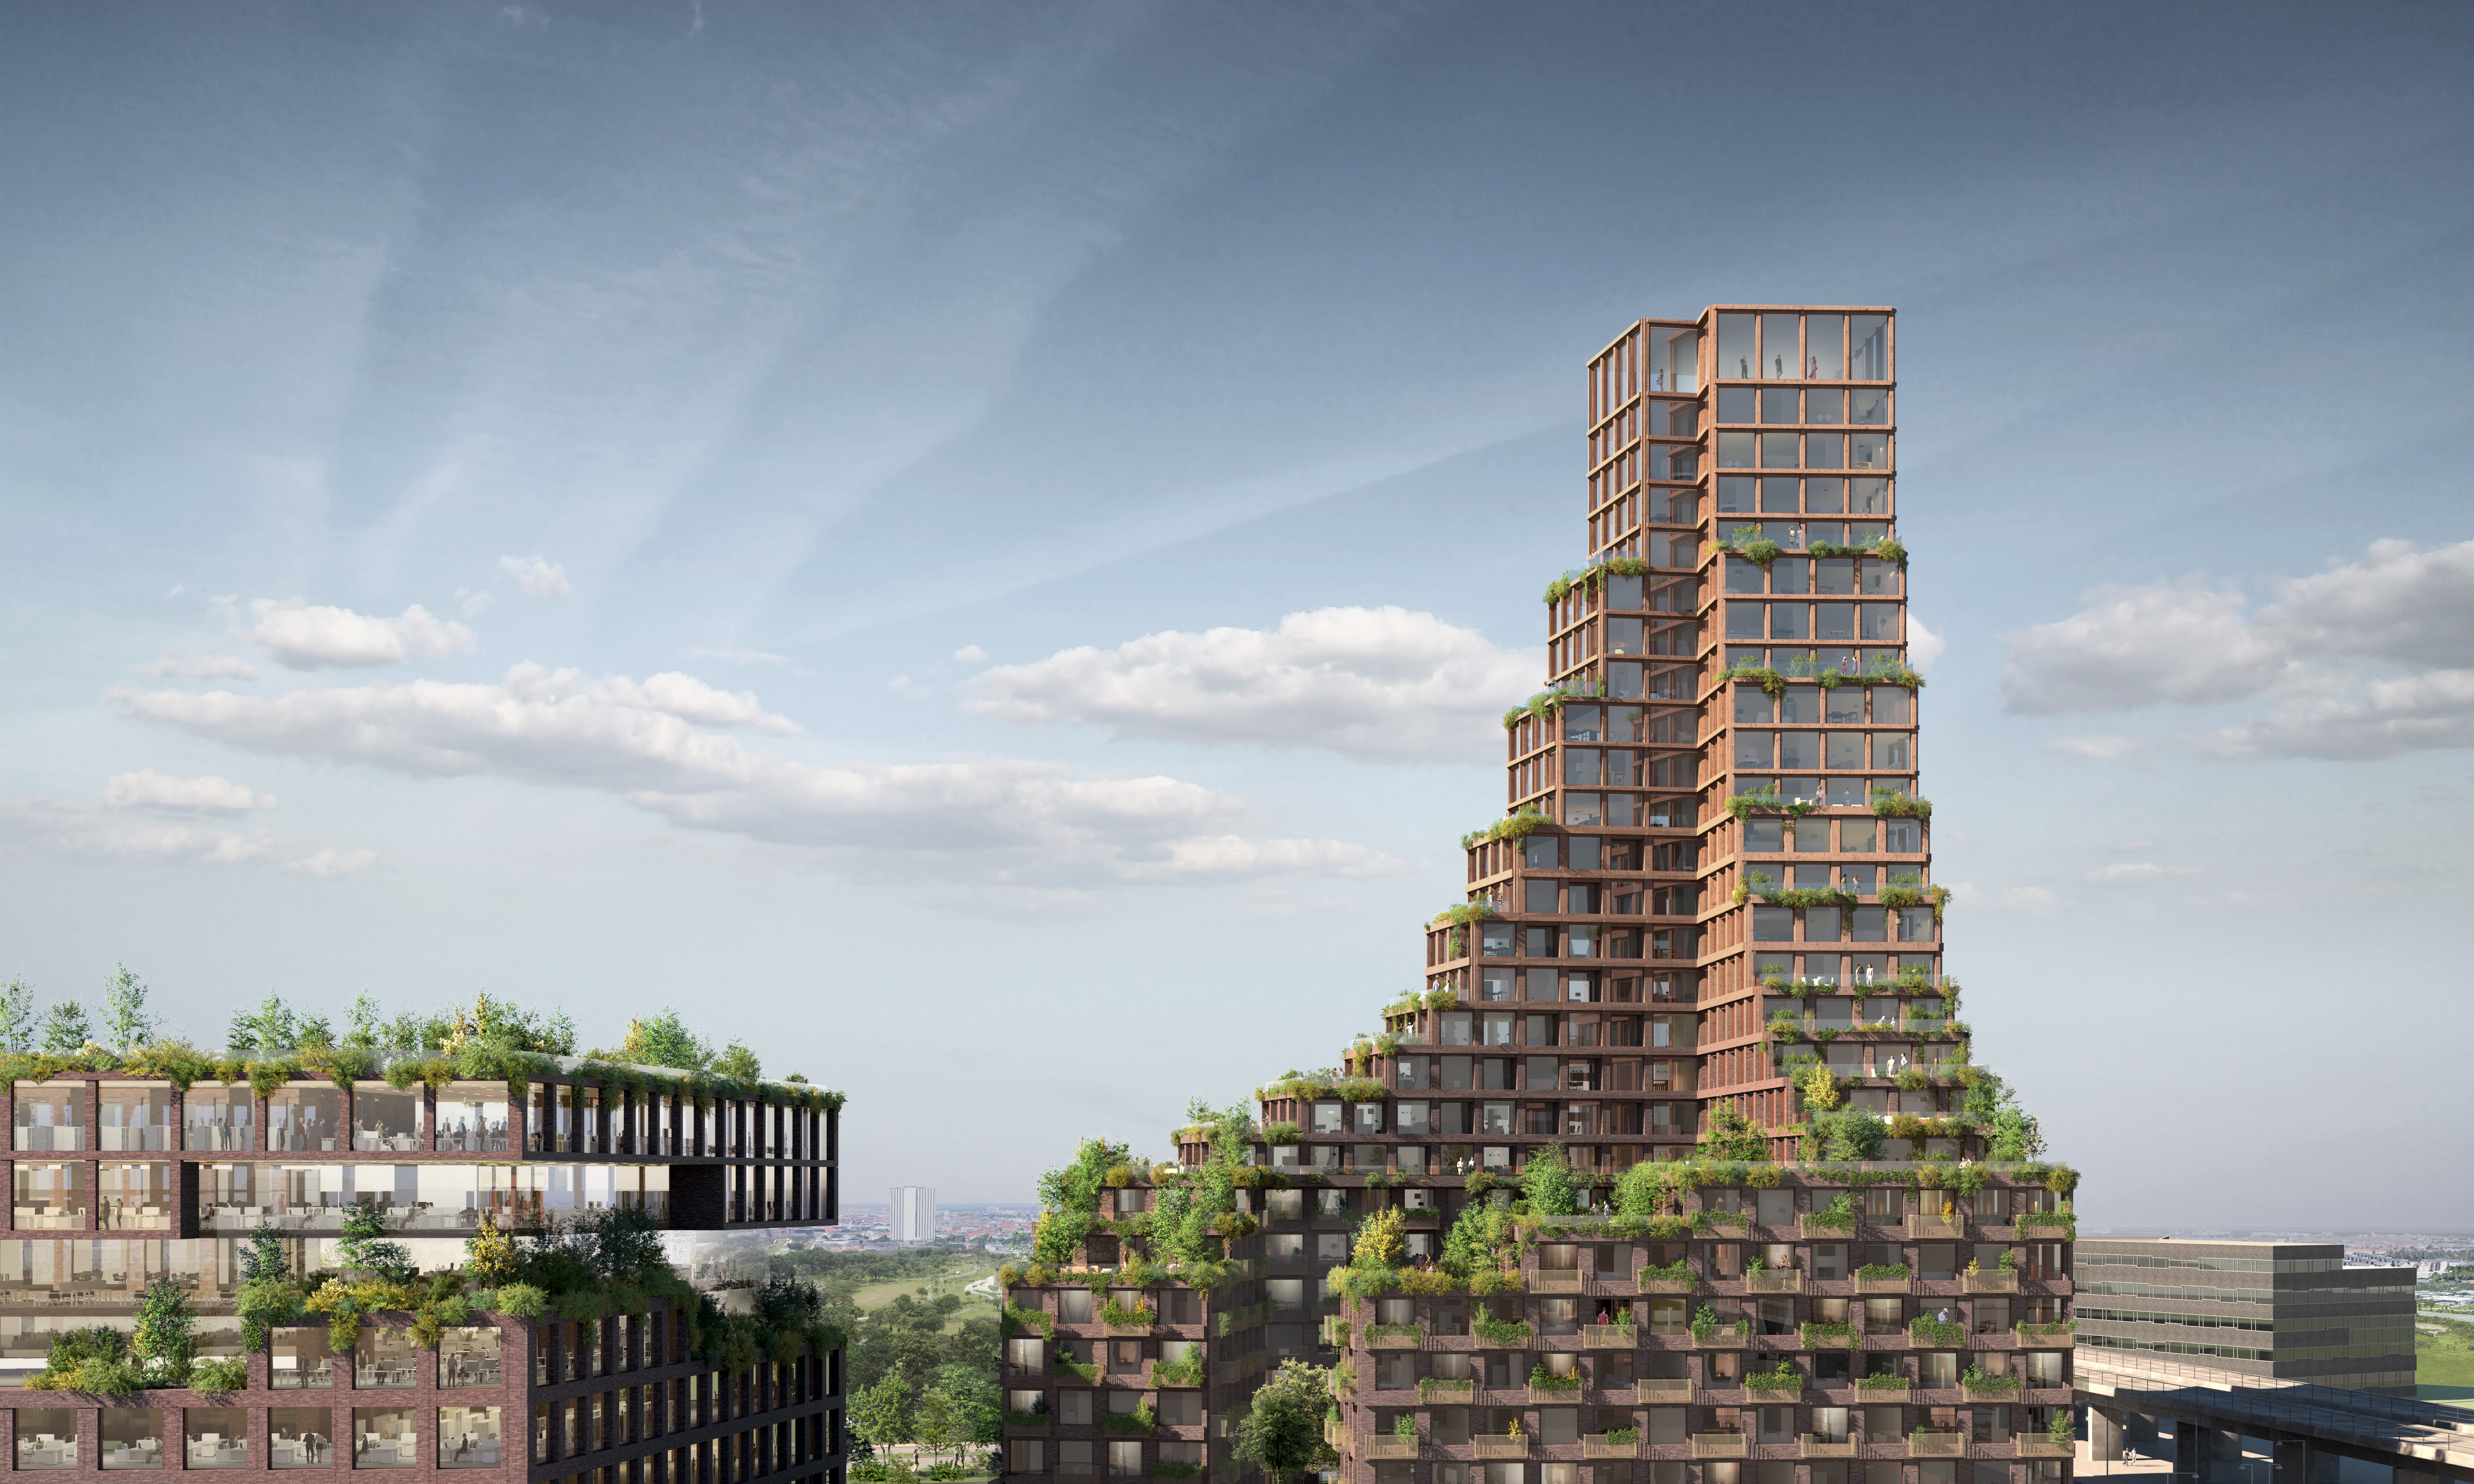 The world's first upcycled high-rise building - MaterialDistrict